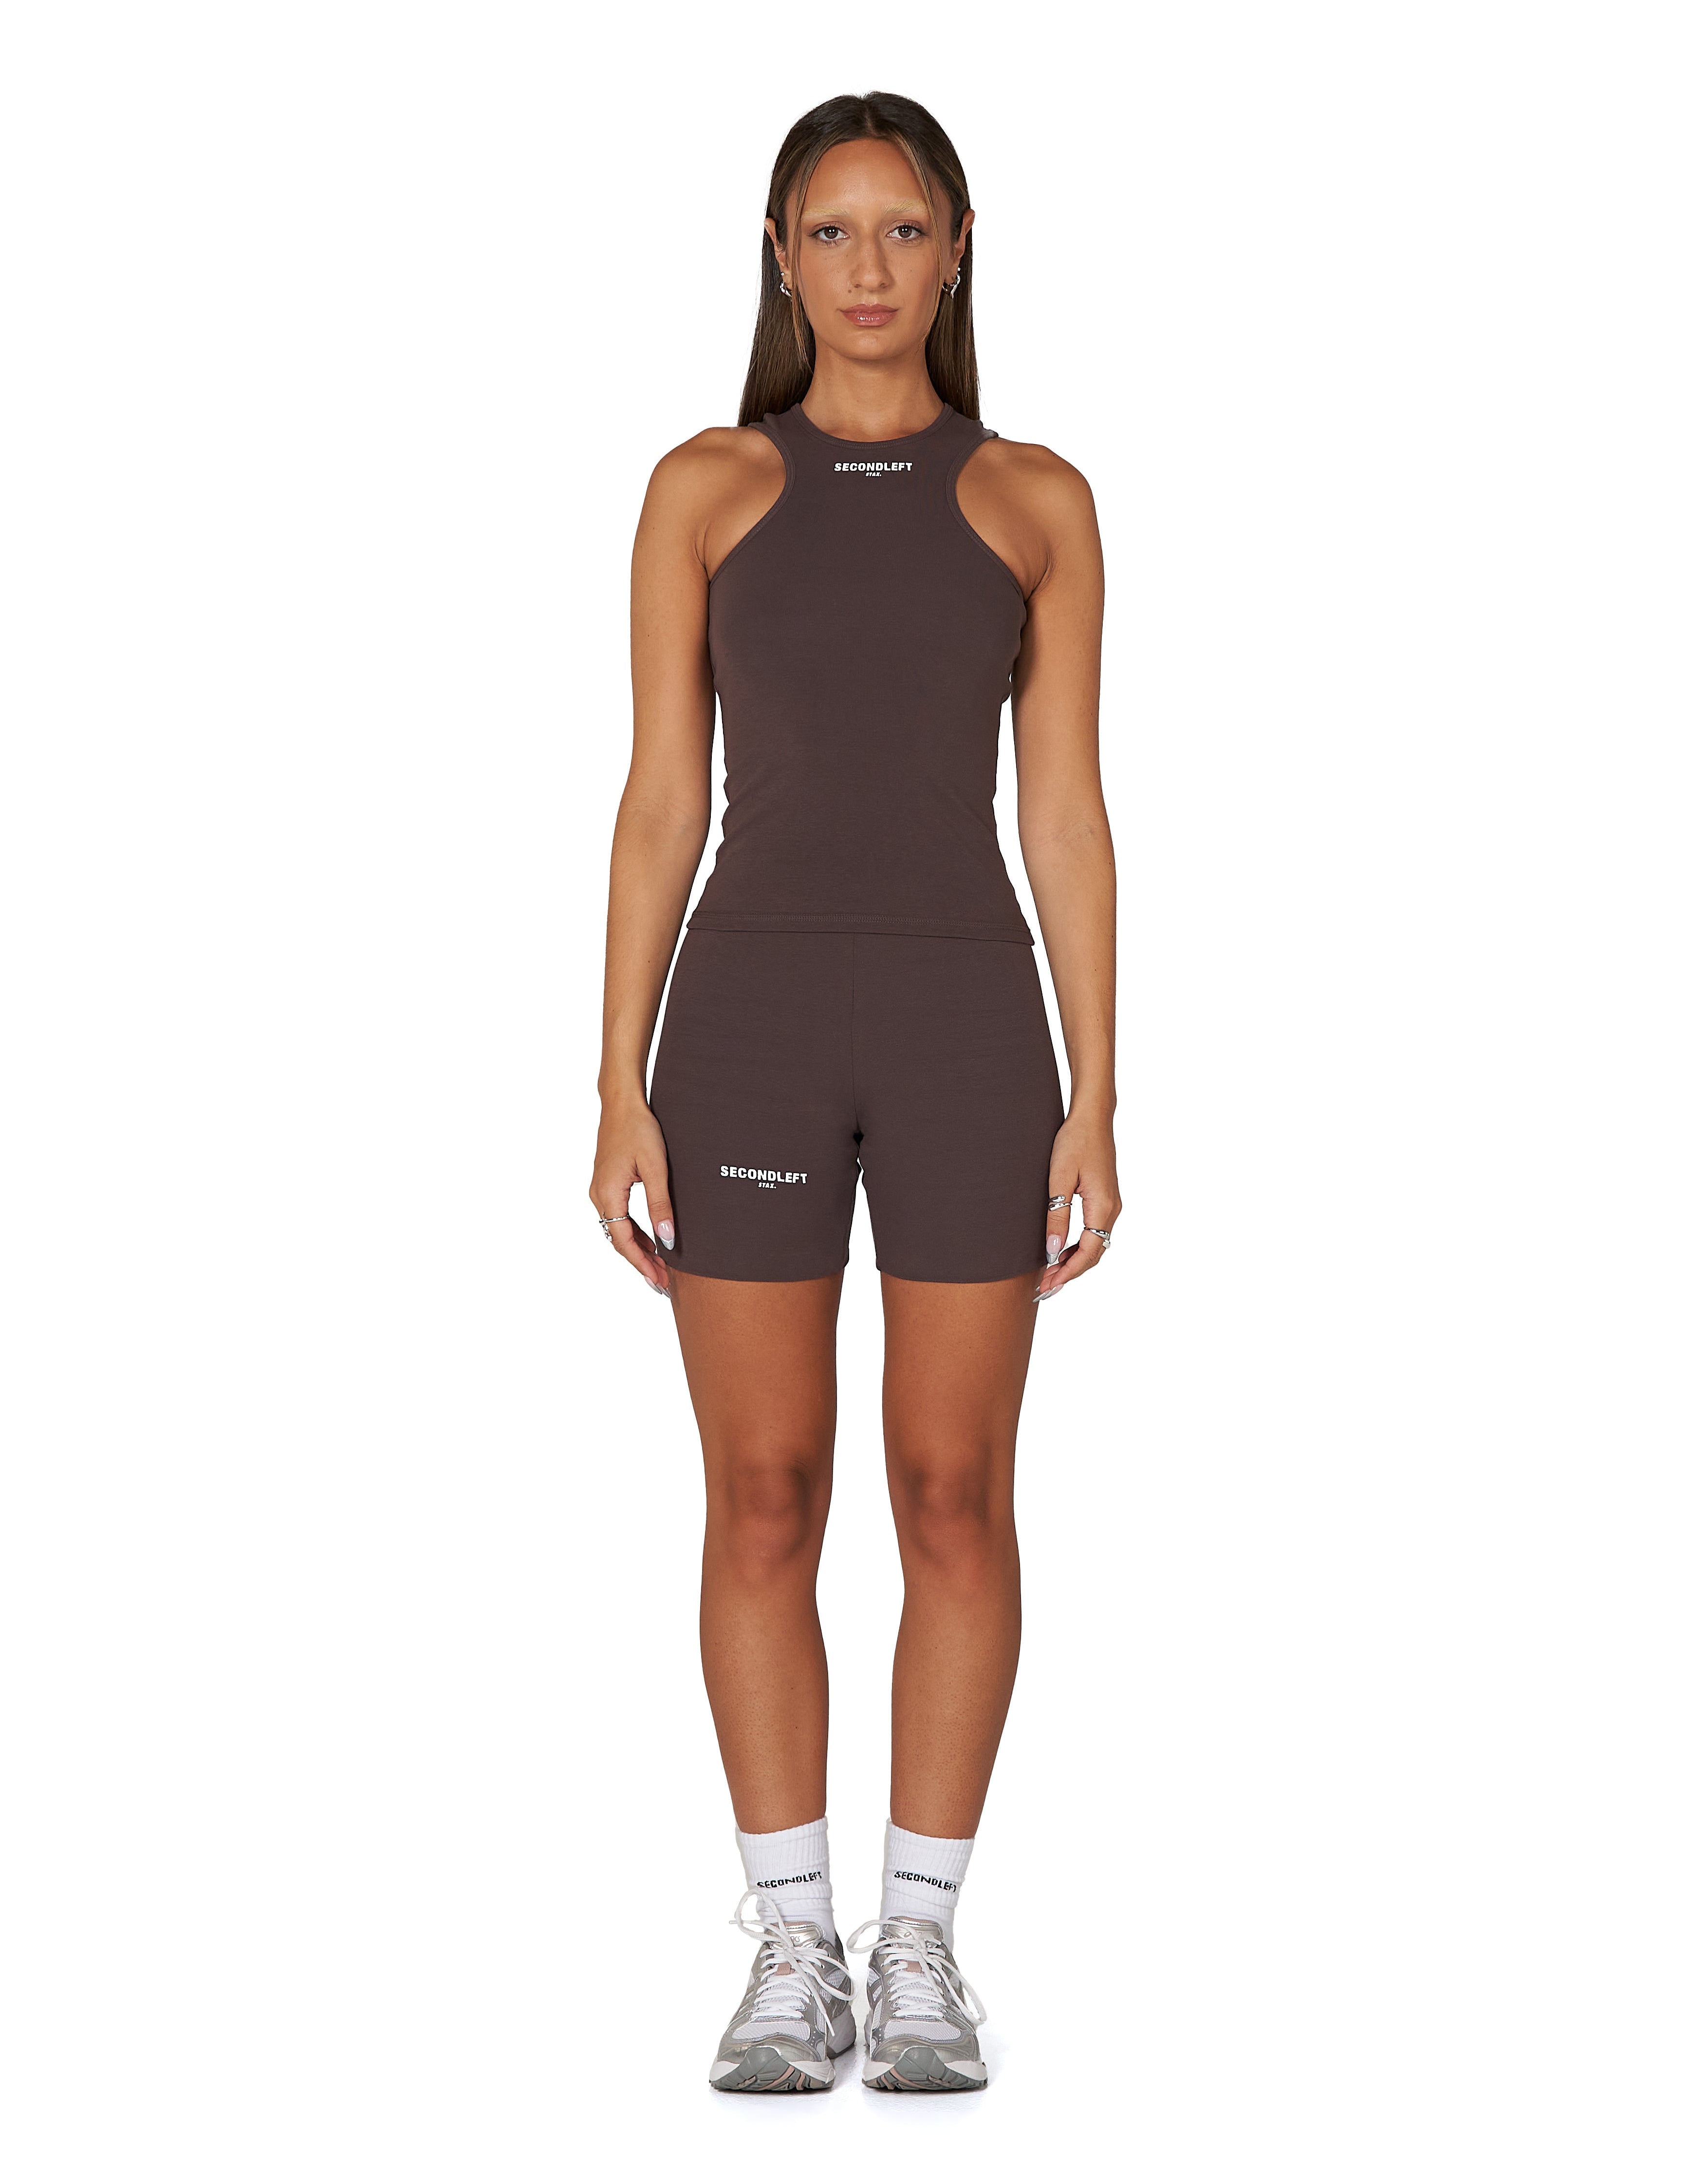 stax-sl-bw-classic-tank-sable-brown